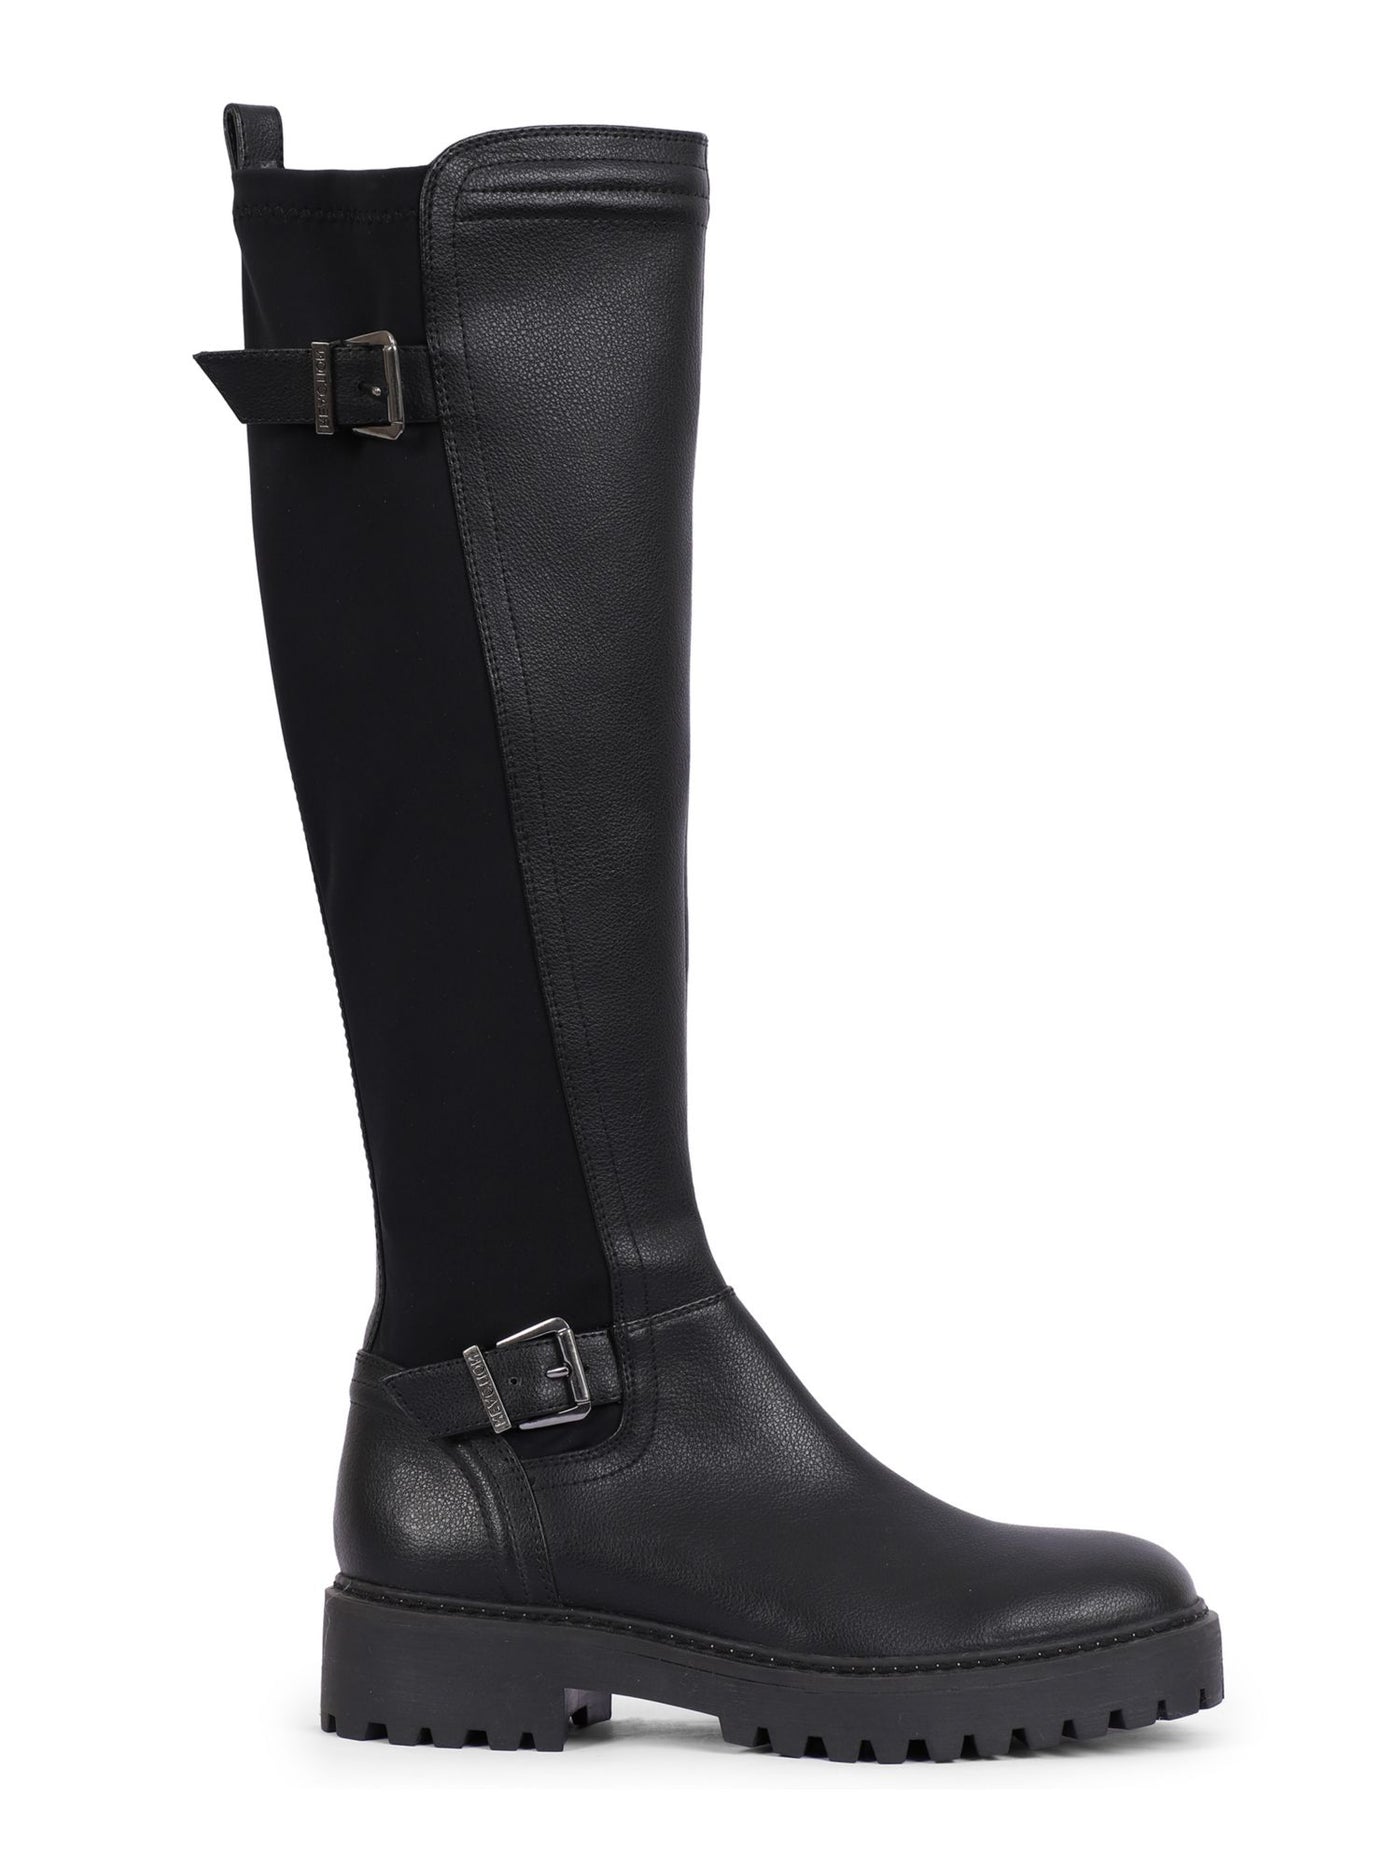 REACTION KENNETH COLE Womens Black Buckle Accent Stretch Salt Round Toe Block Heel Zip-Up Riding Boot 9